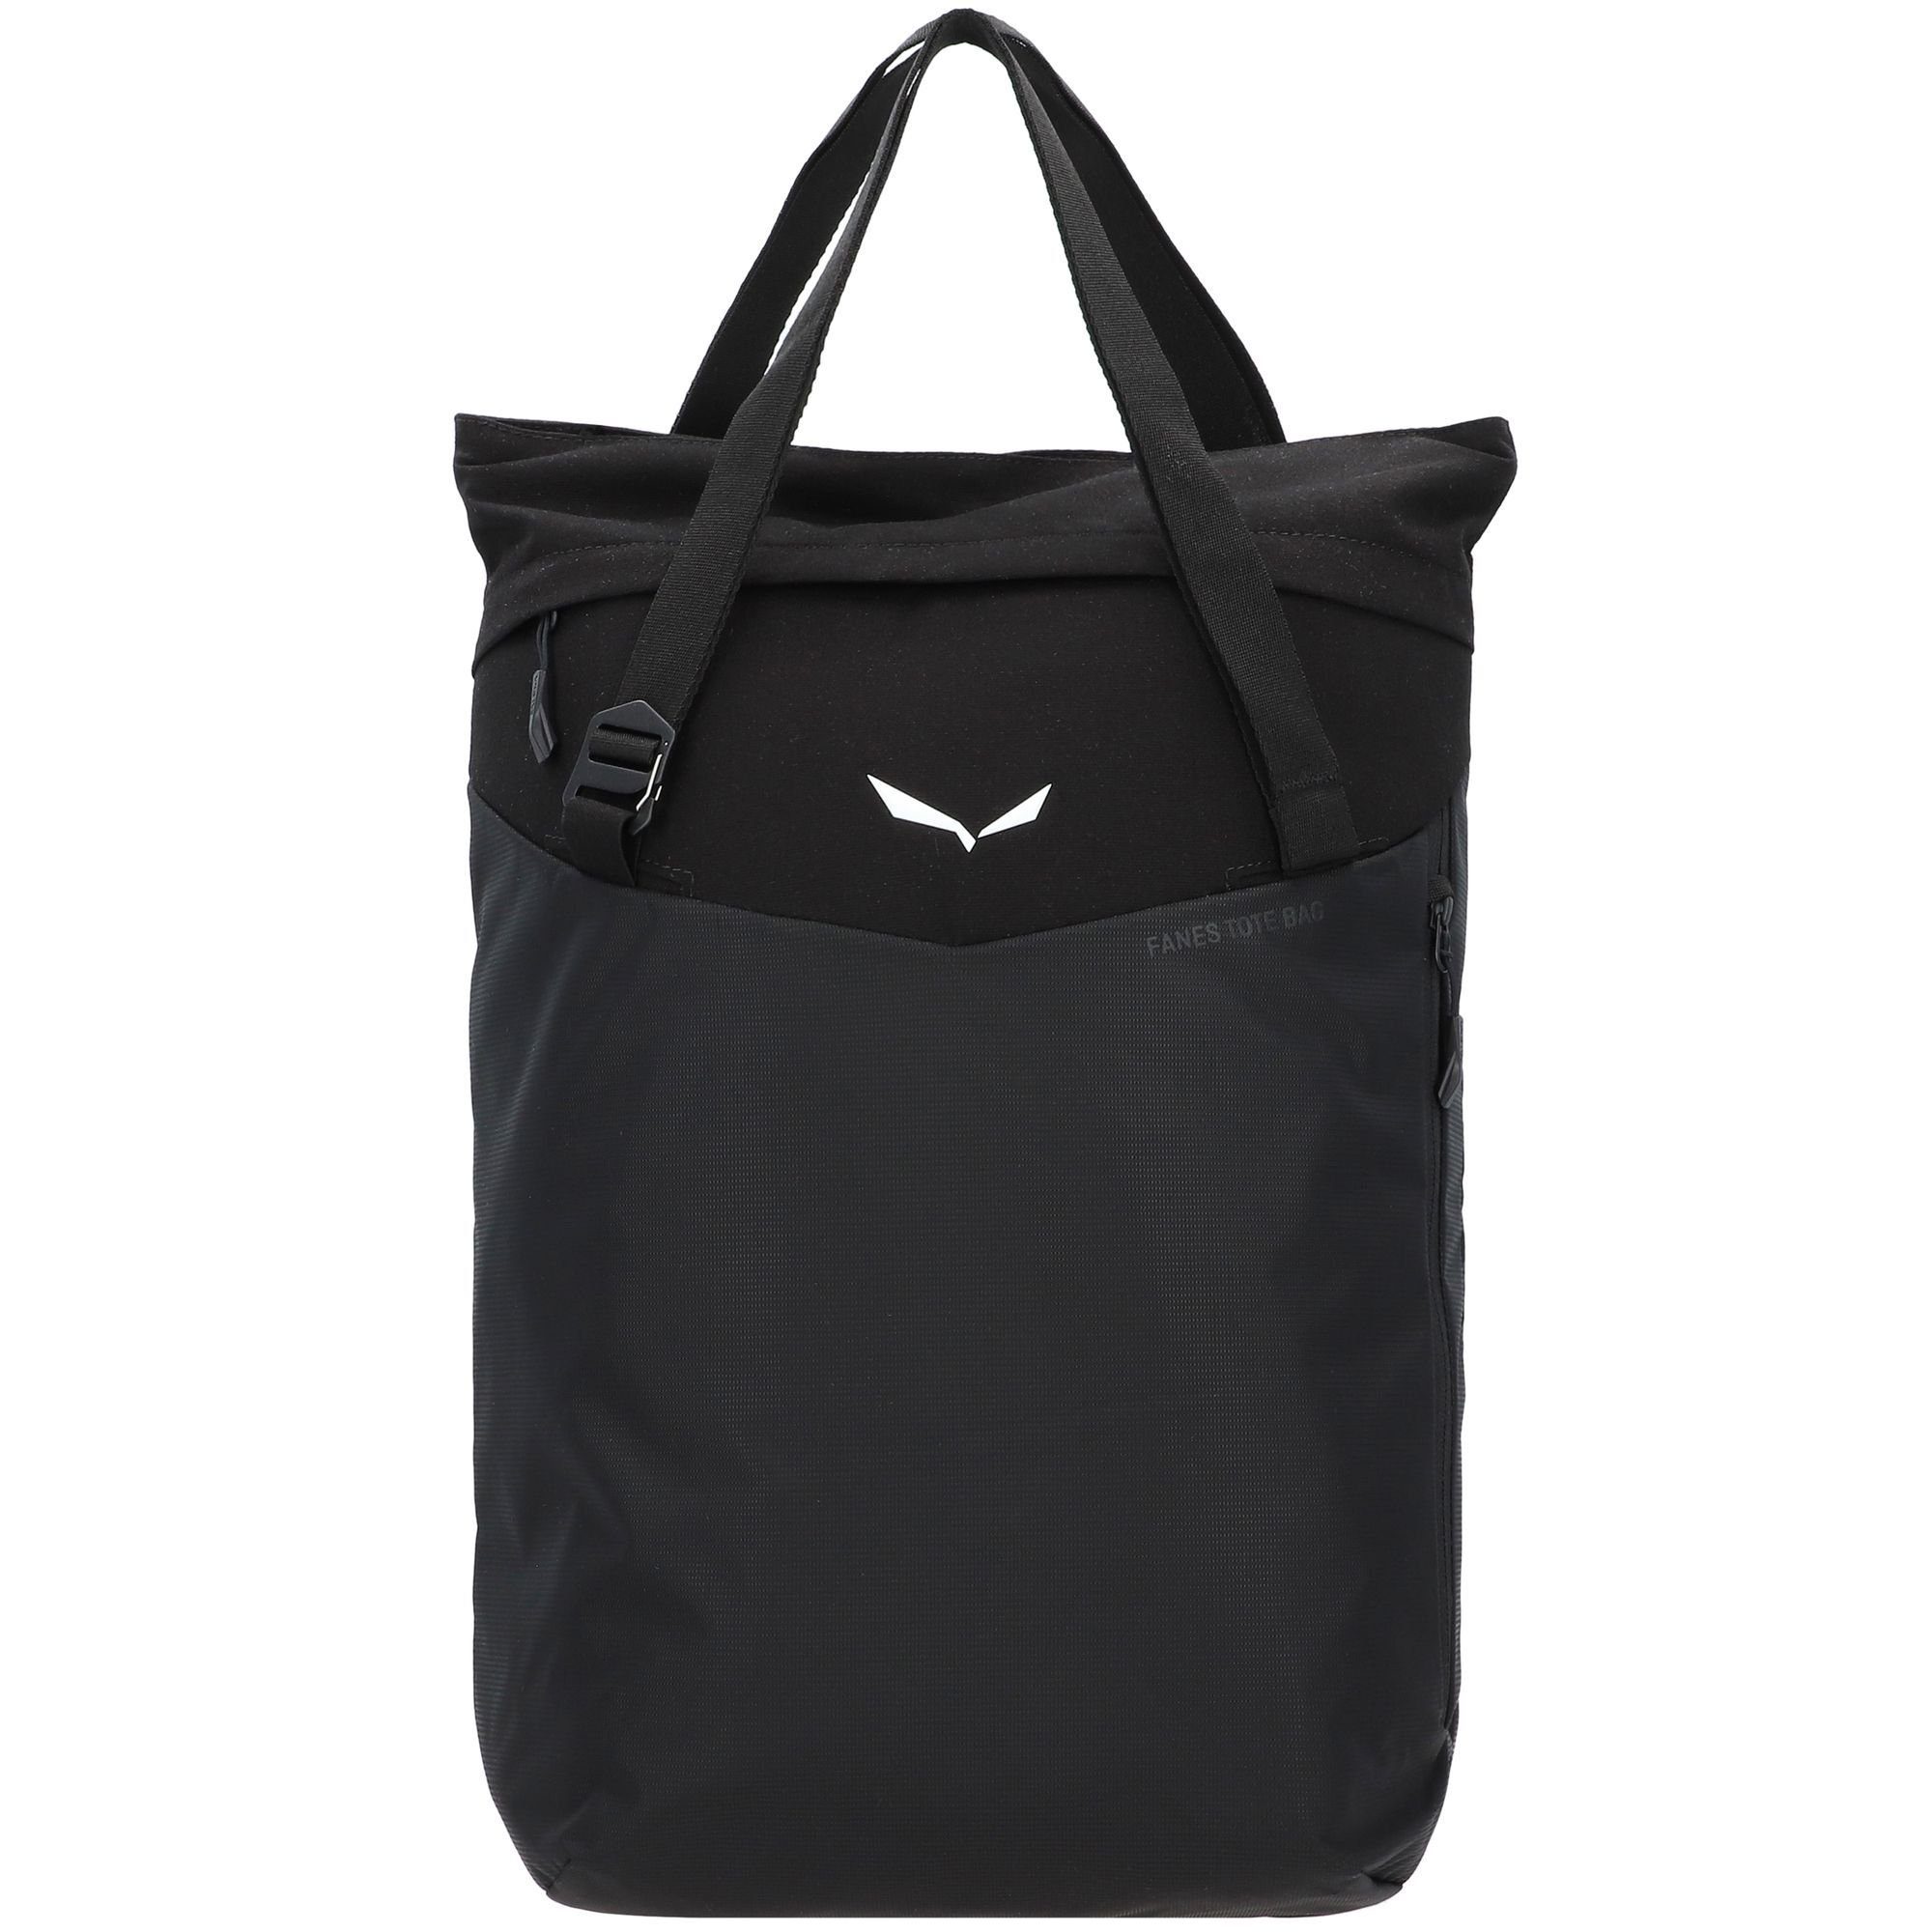 out Polyester Schultertasche black Salewa Fanes,